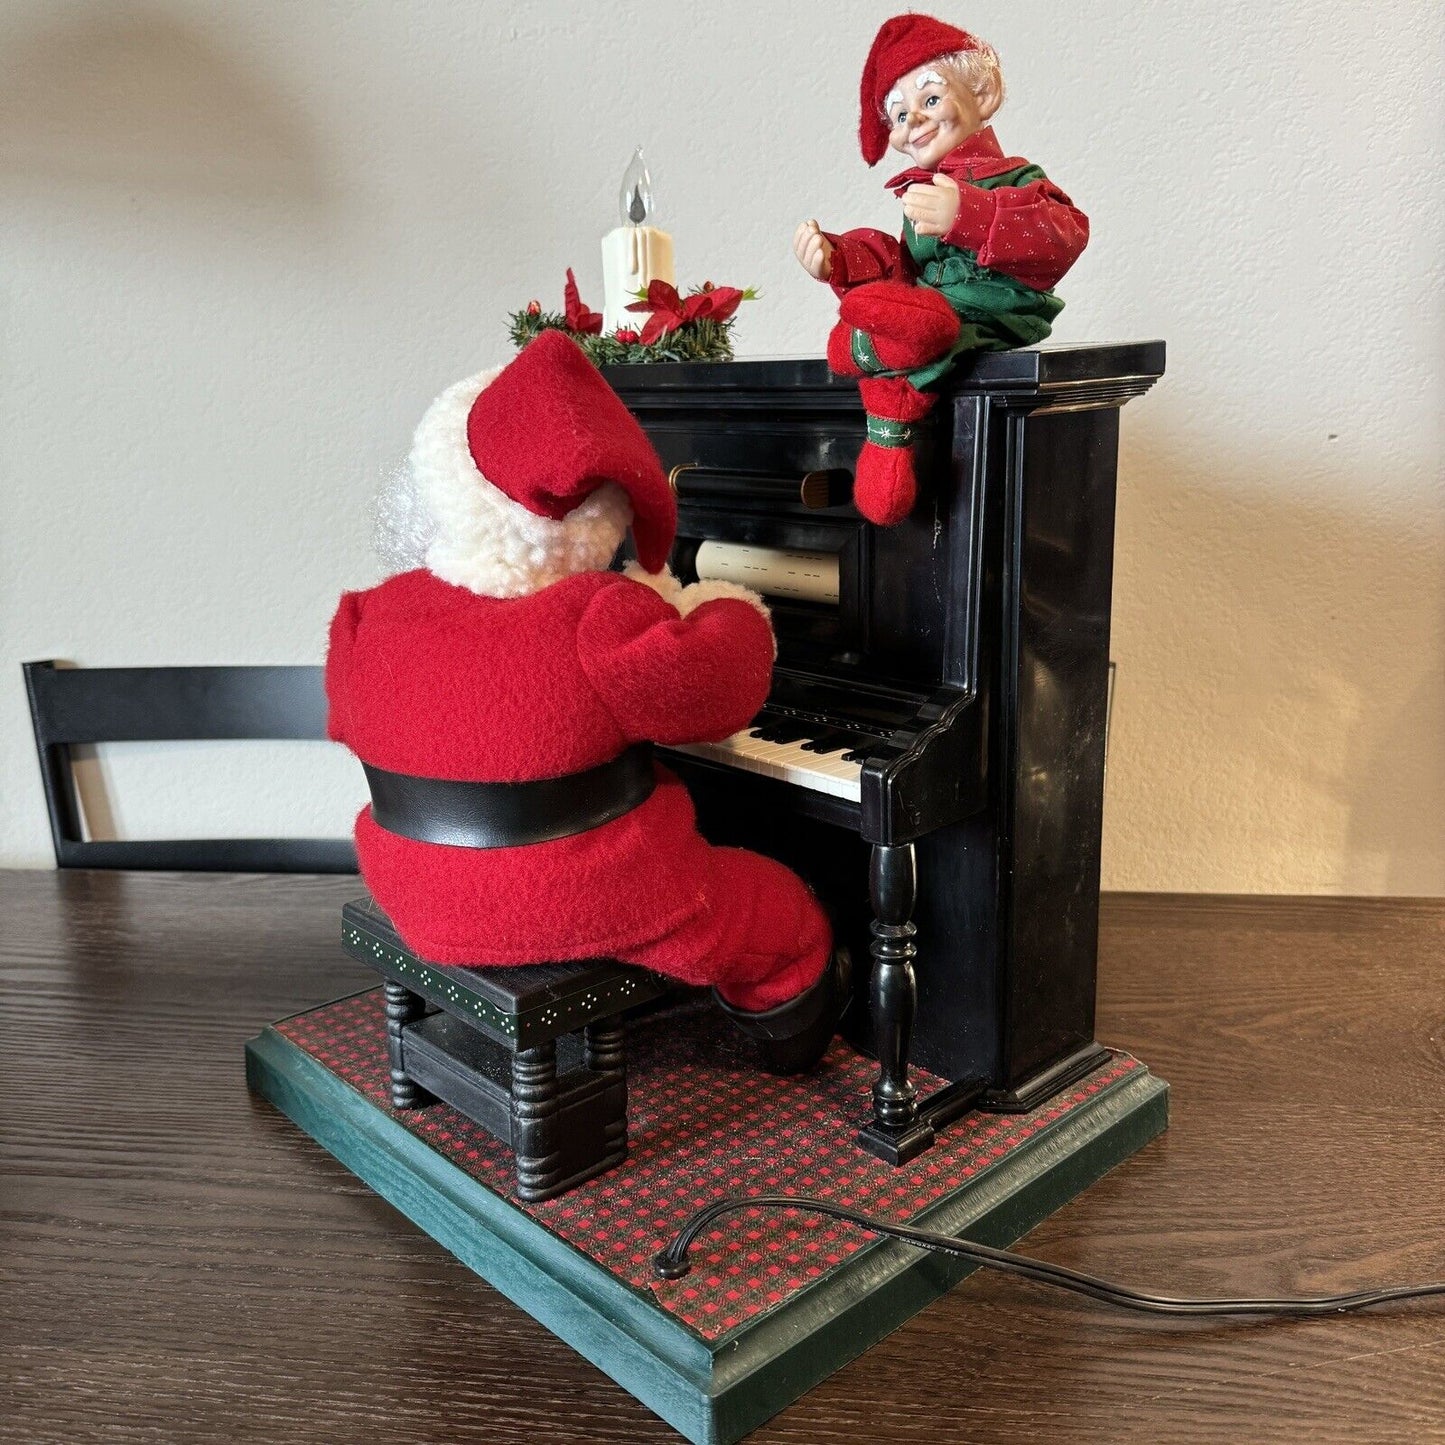 Holiday Creations Sing-Along with Santa Animated Cassette Player 1995 Works XL